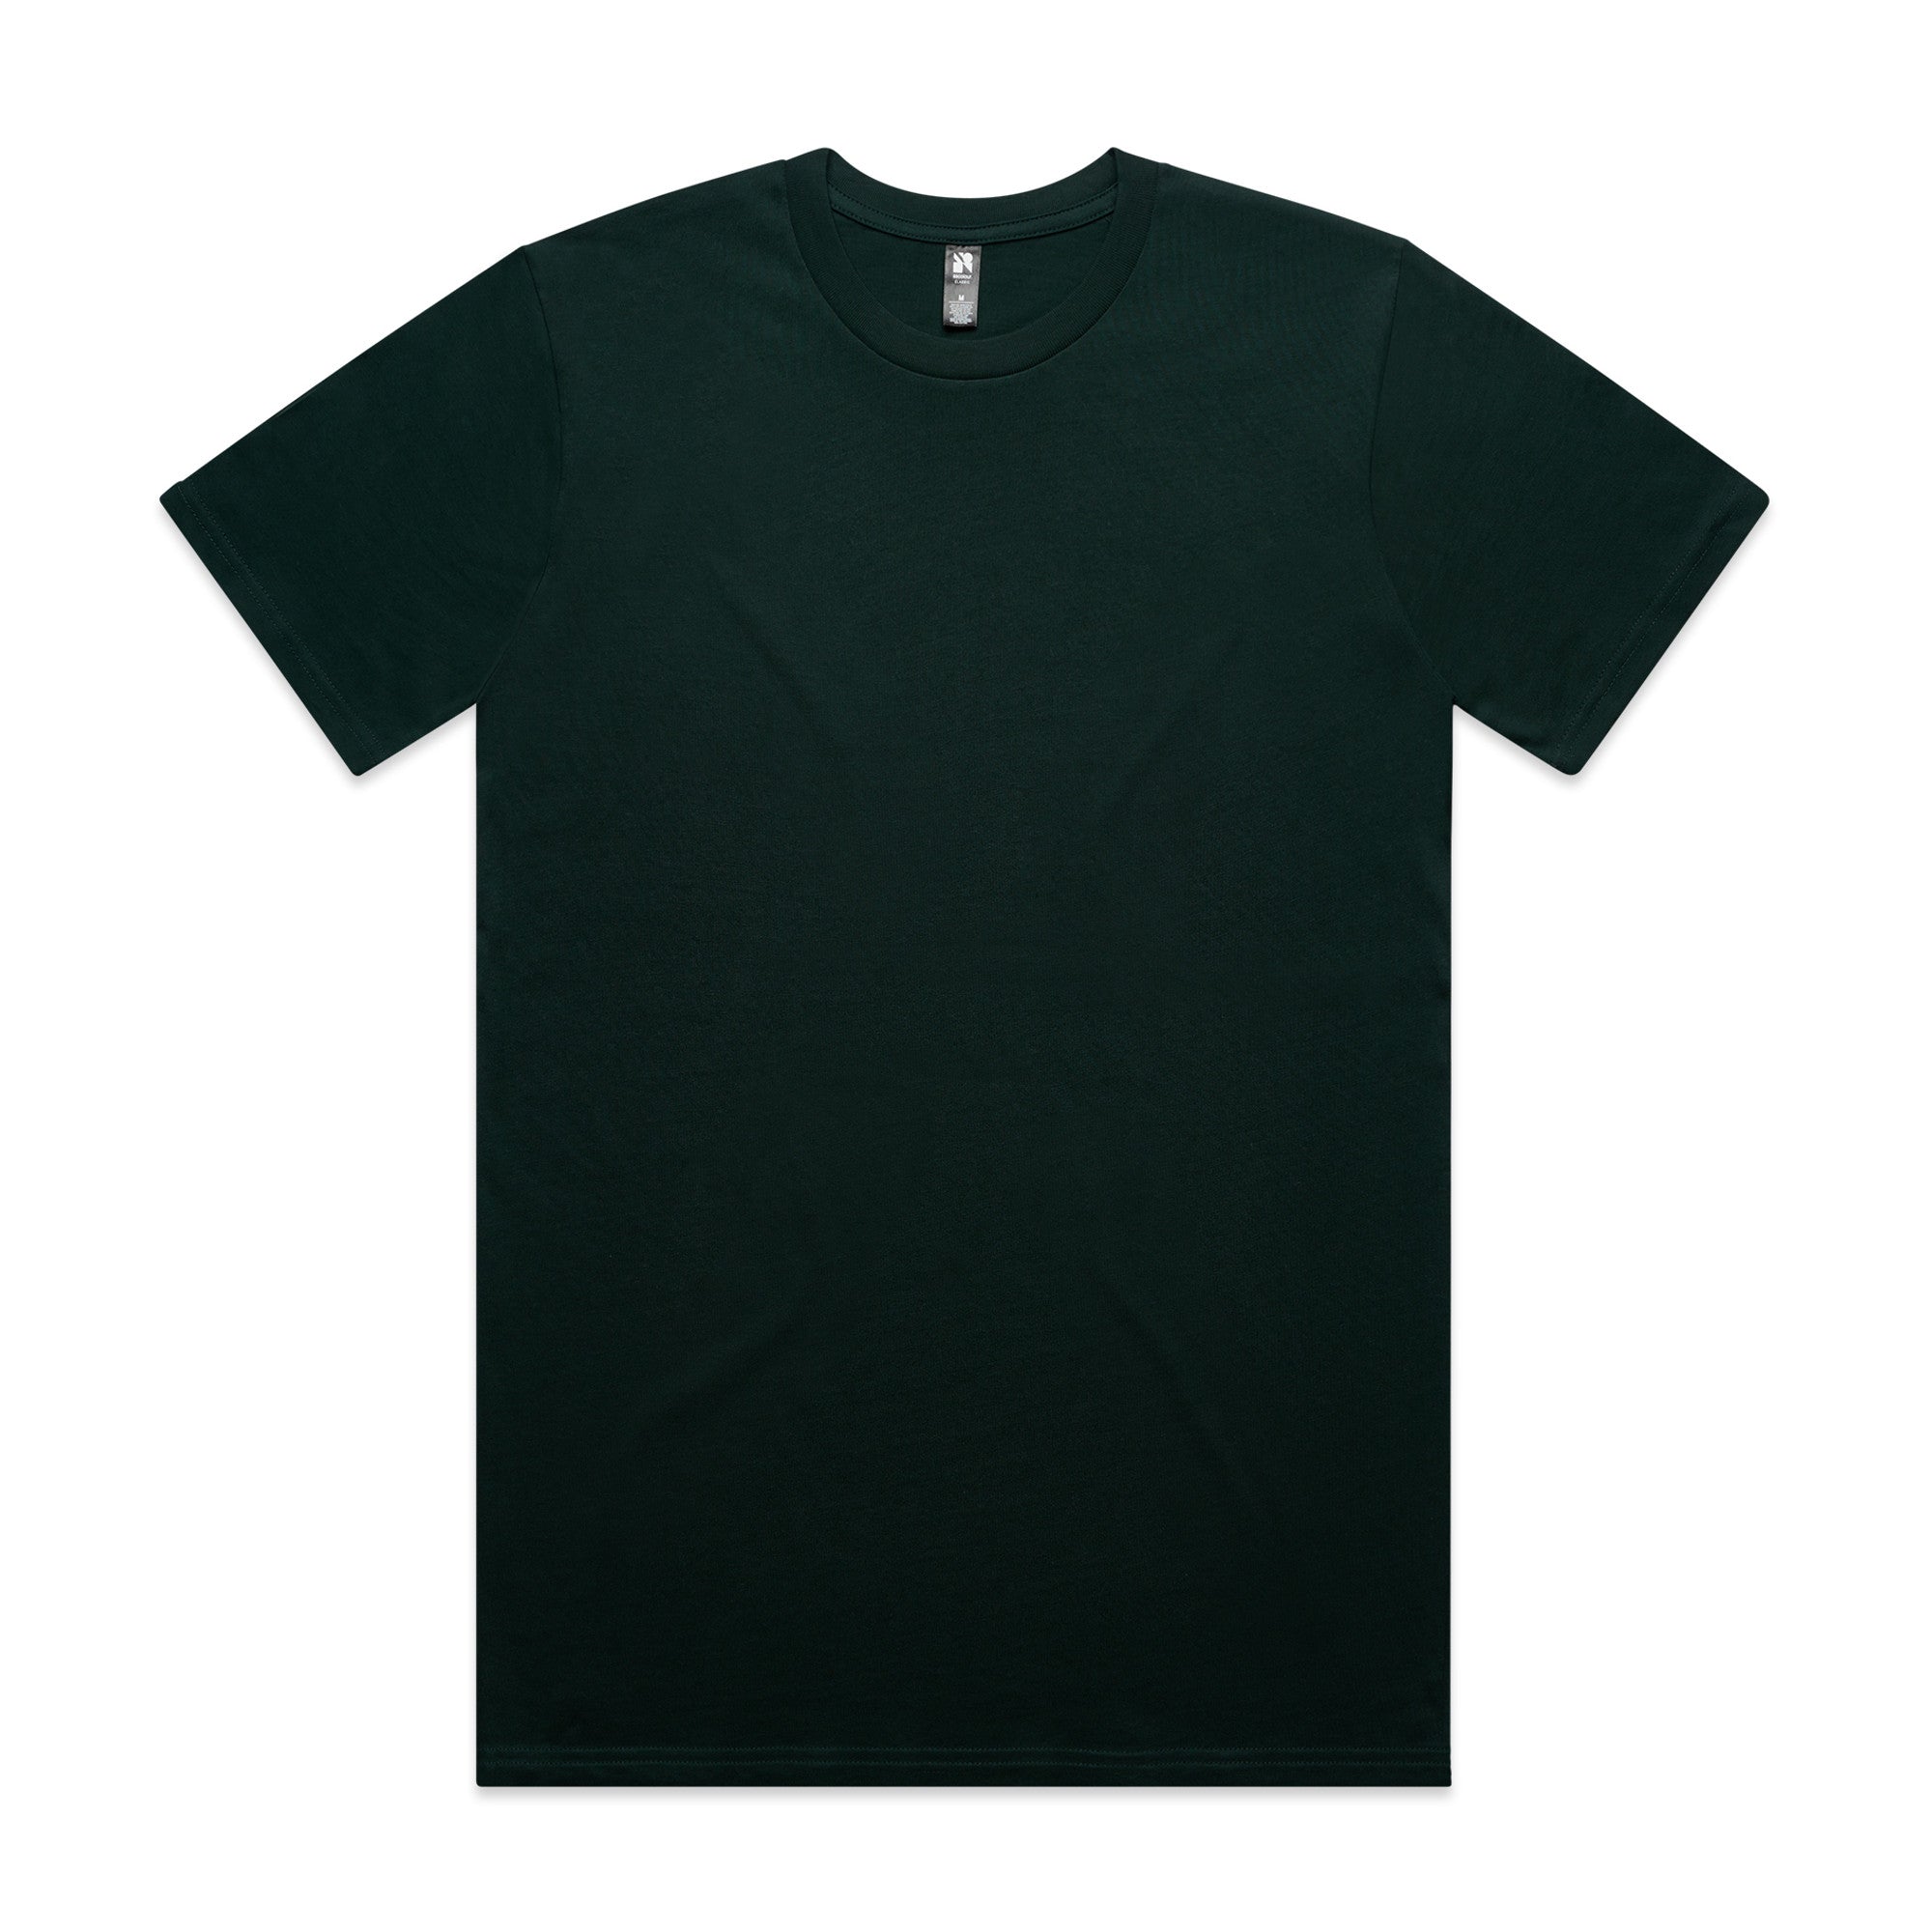 AS Colour Mens Classic Tee 5026 Size M